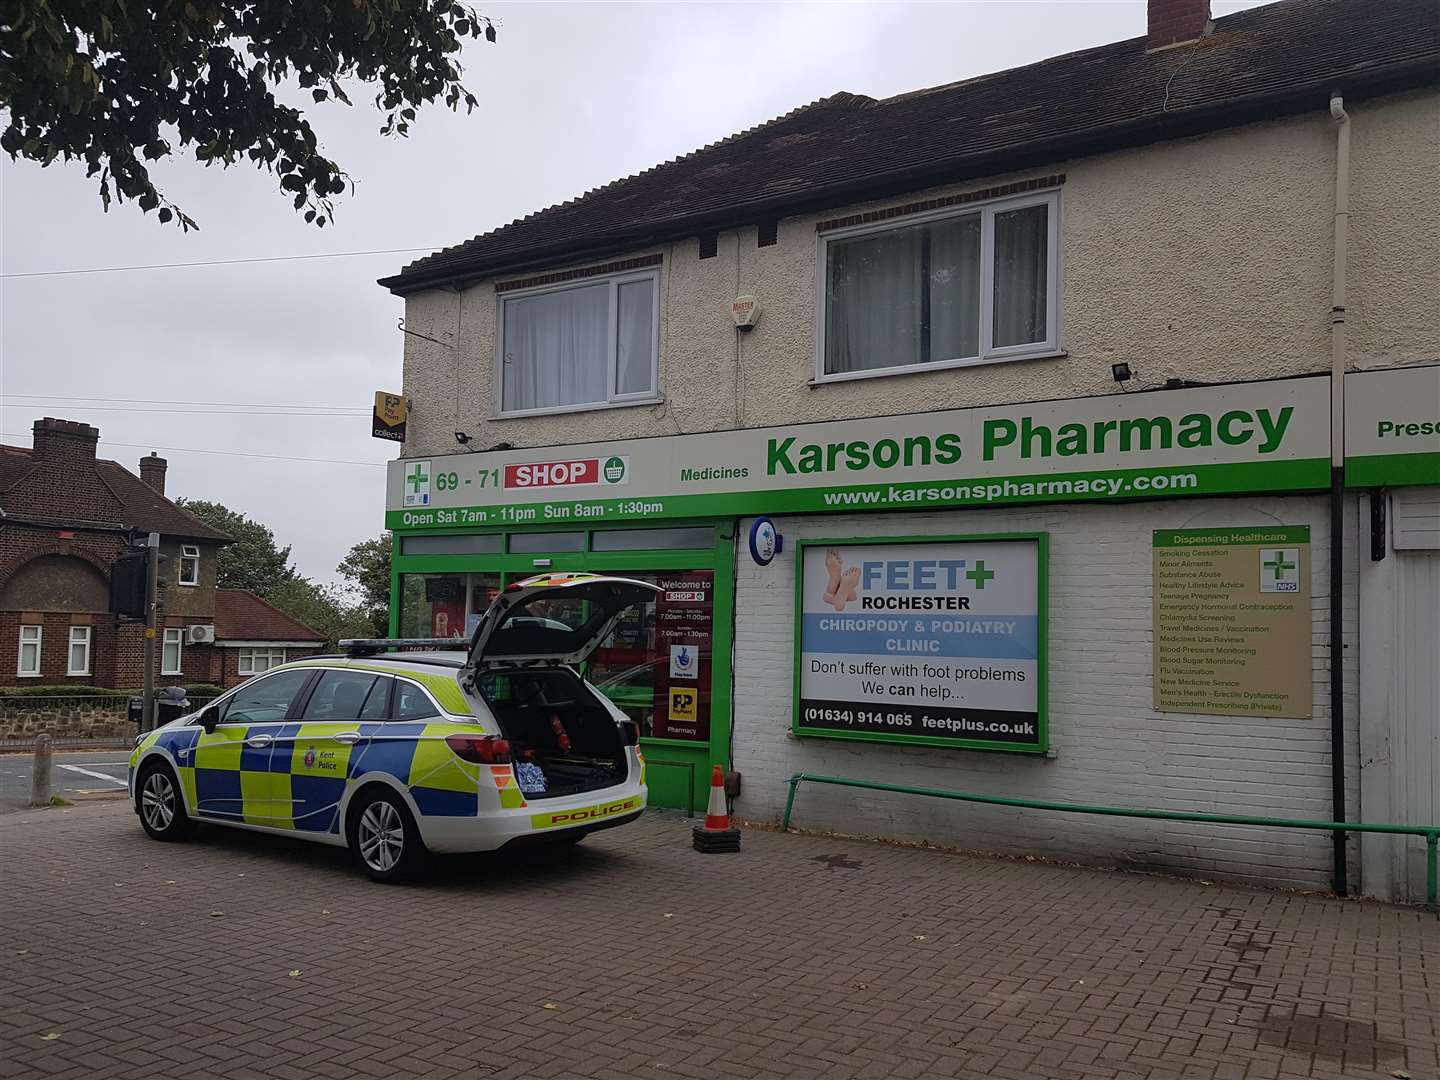 Police were called to Karsons Pharmacy after a burglary (4227649)